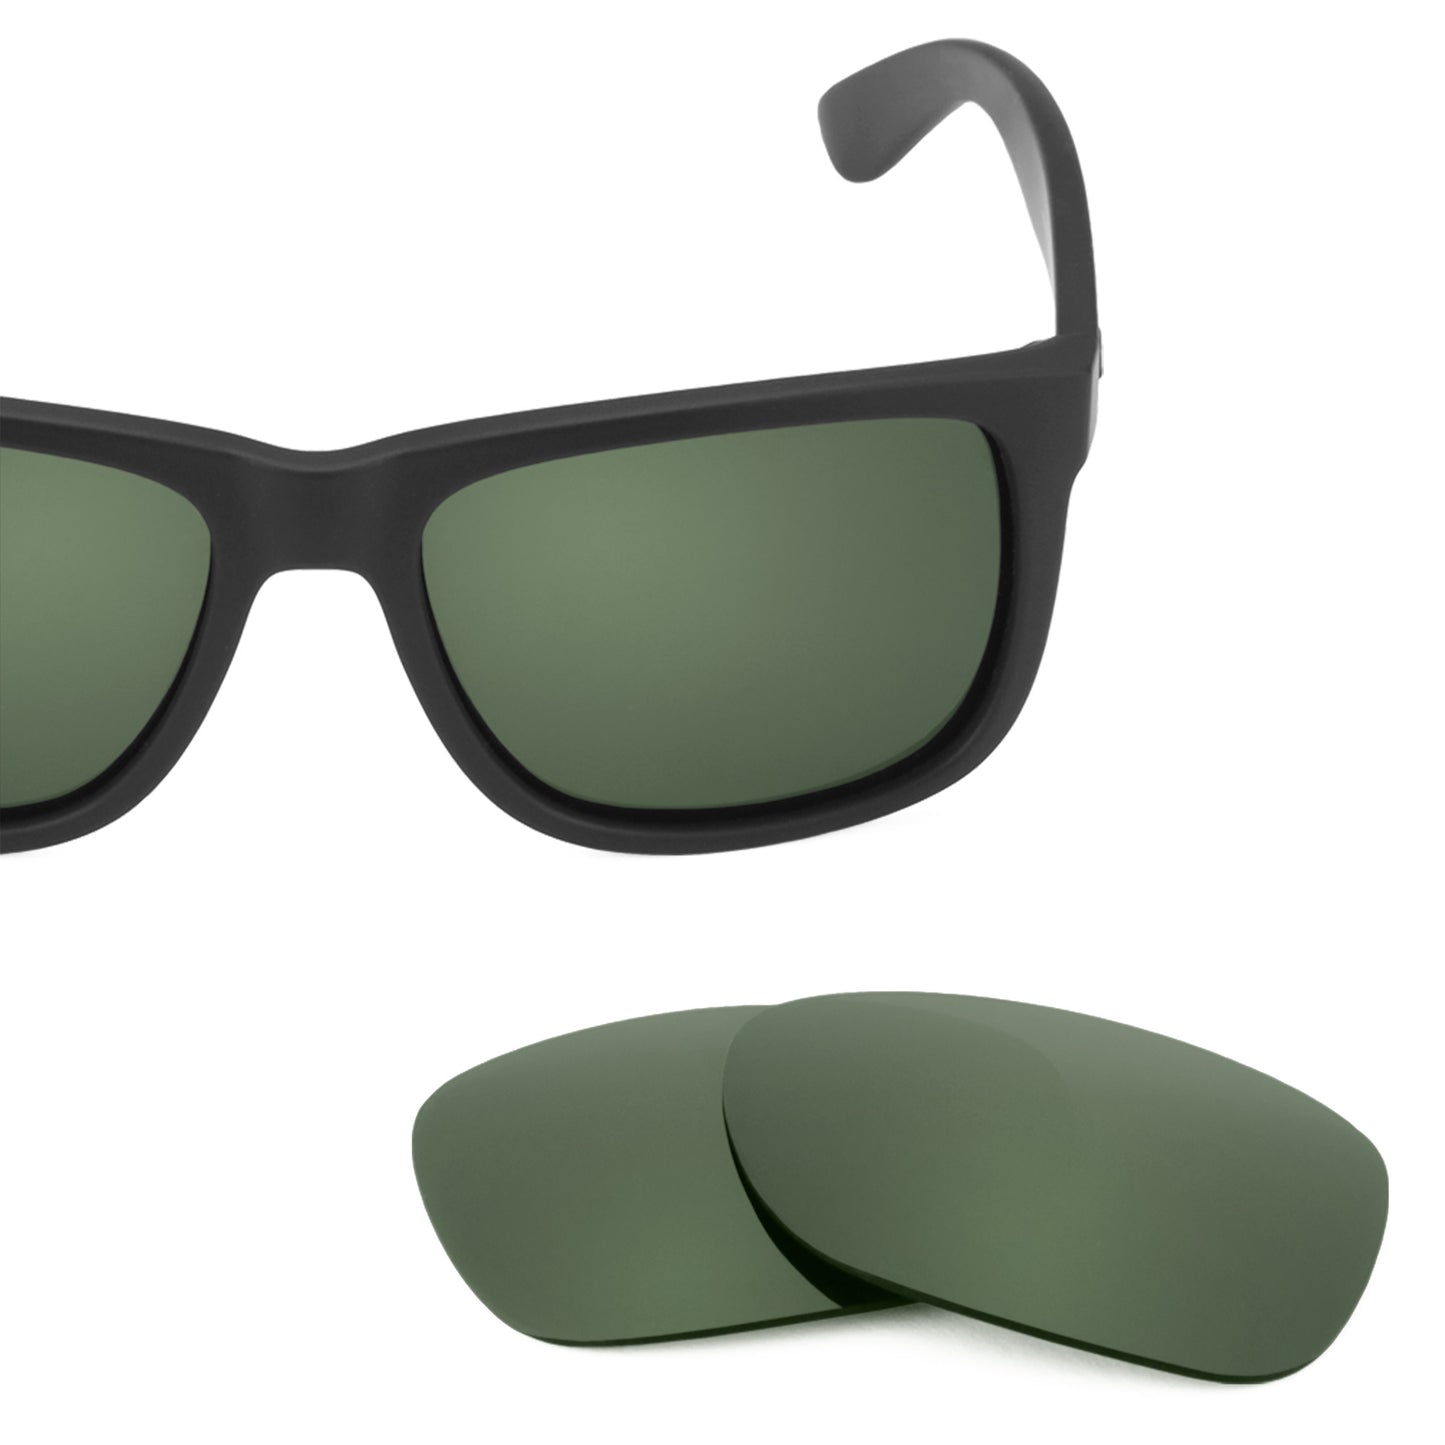 Revant replacement lenses for Ray-Ban Justin RB4165 54mm Non-Polarized Gray Green